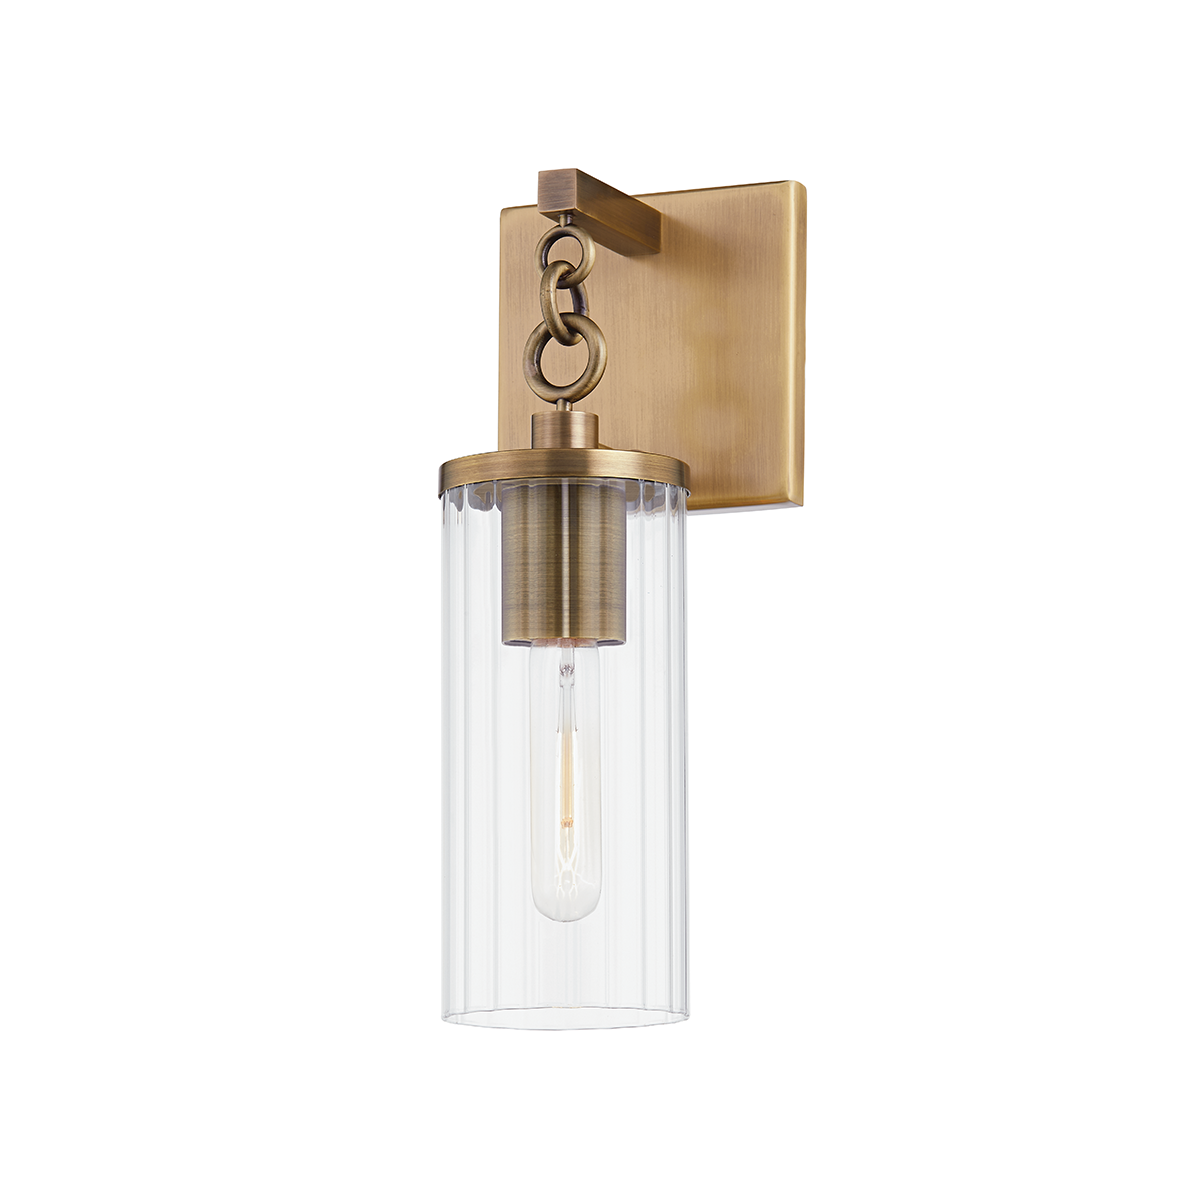 Troy YUCCA 1 LIGHT SMALL EXTERIOR WALL SCONCE B6121 Outdoor l Wall Troy Lighting PATINA BRASS  